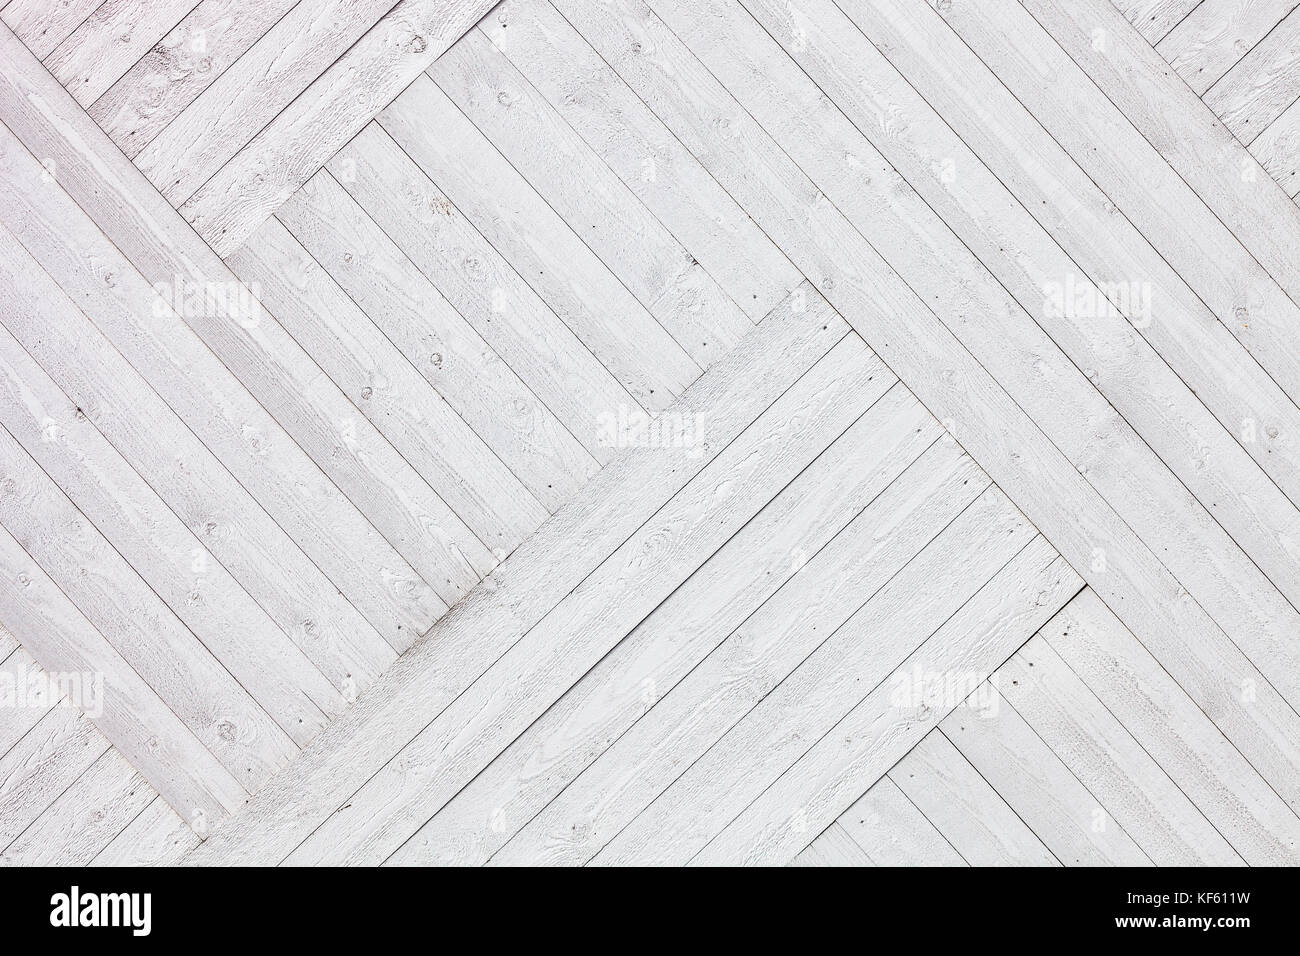 White rustic wooden planks background Stock Photo